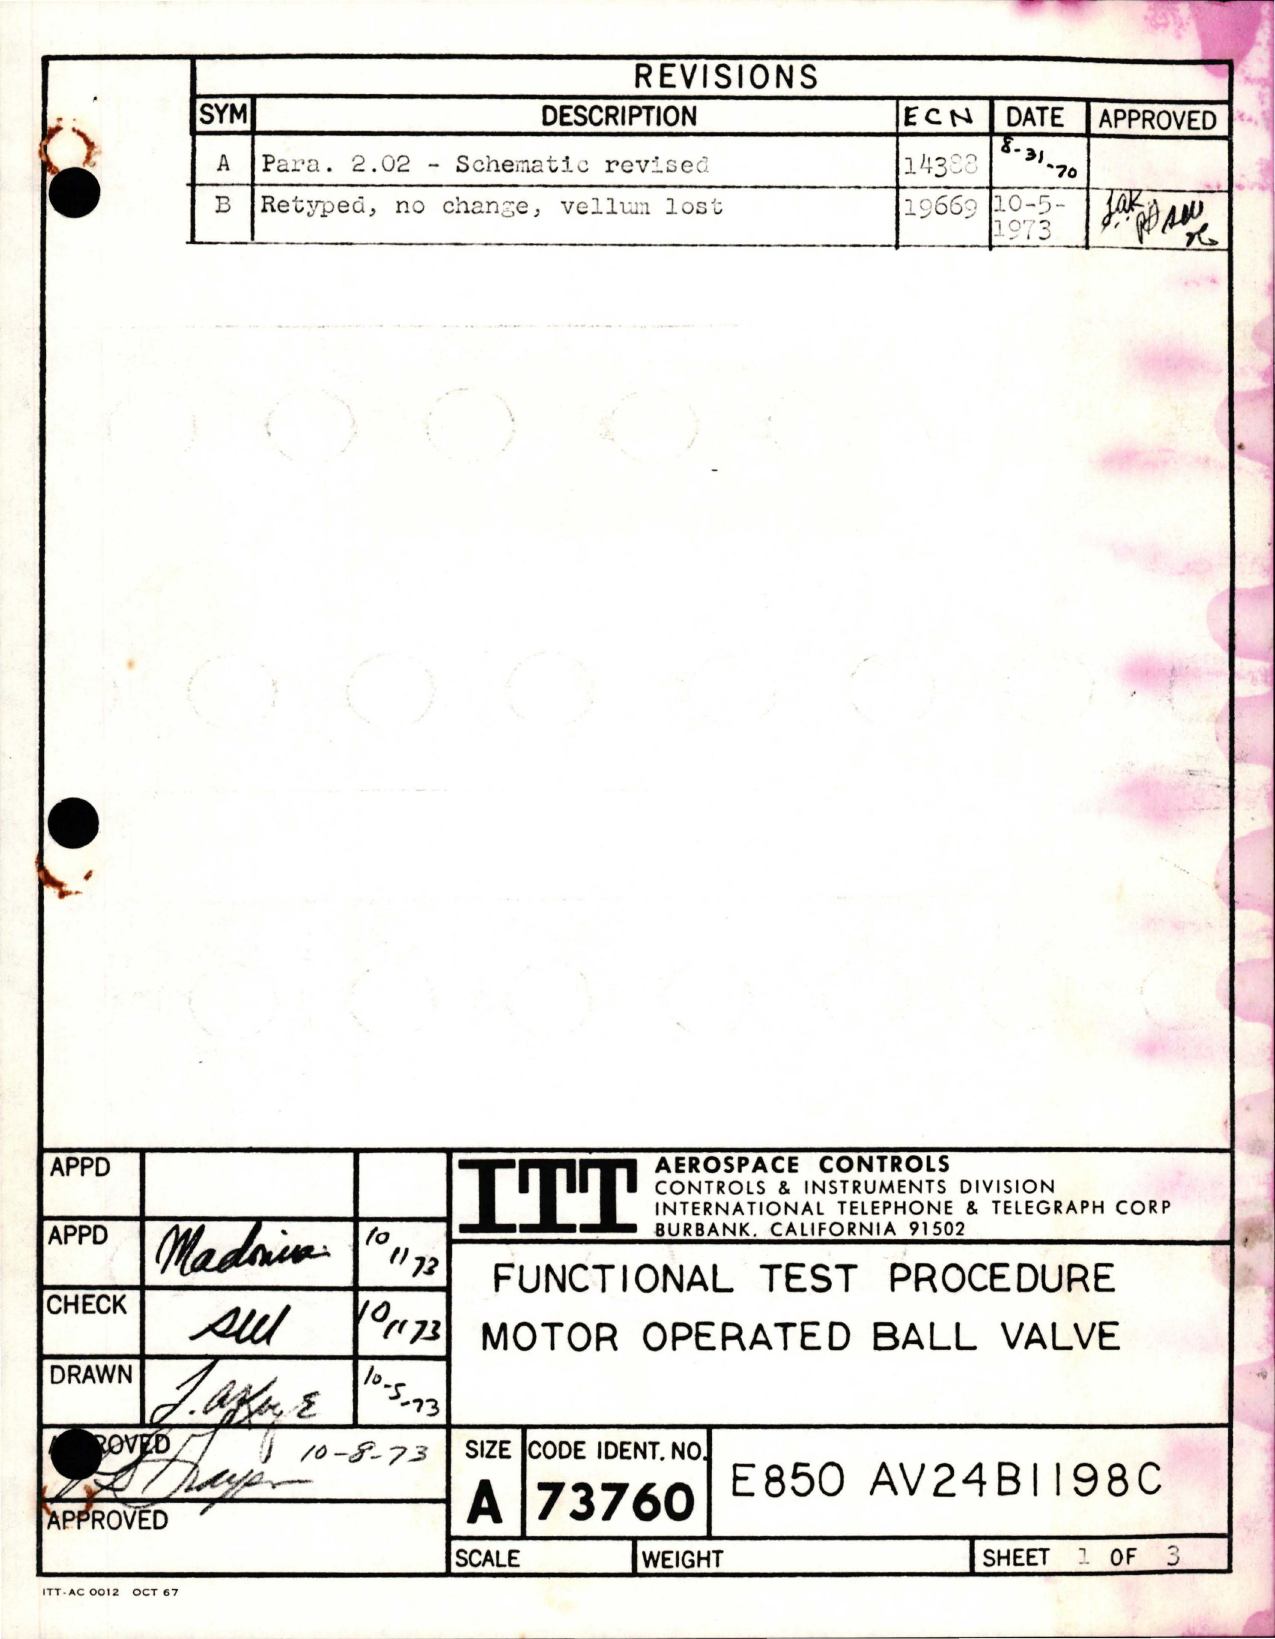 Sample page 1 from AirCorps Library document: Functional Test Procedure for Motor Operated Ball Valve